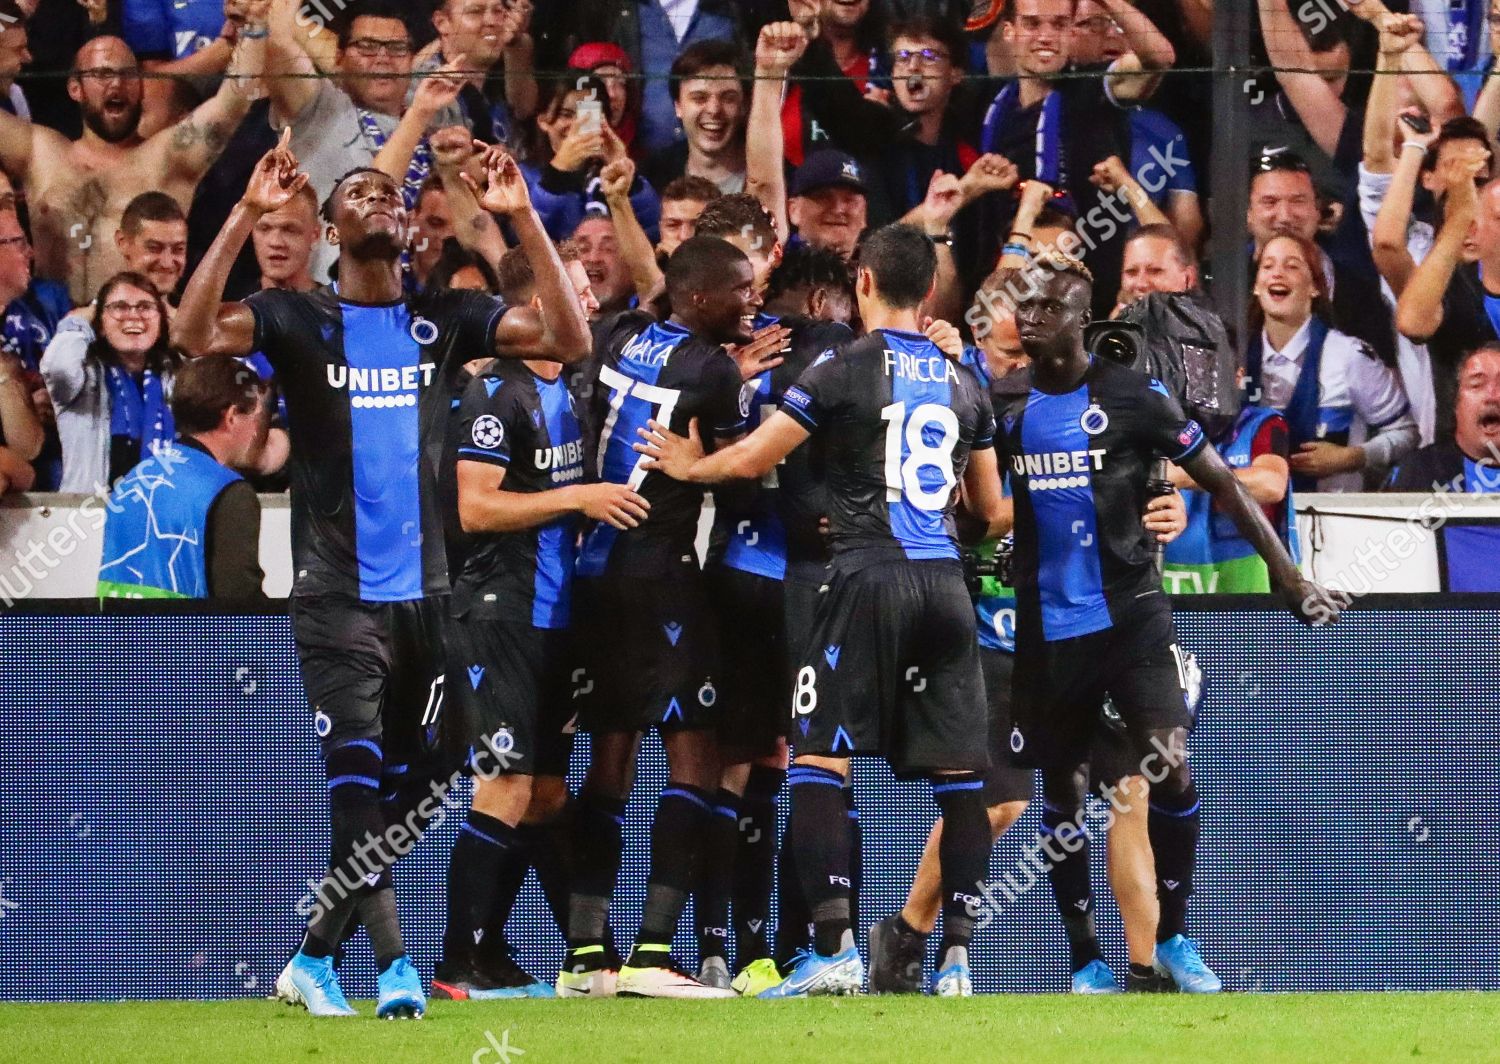 Players Club Brugge Celebrate Their 10 Editorial Stock Photo - Stock Image  | Shutterstock